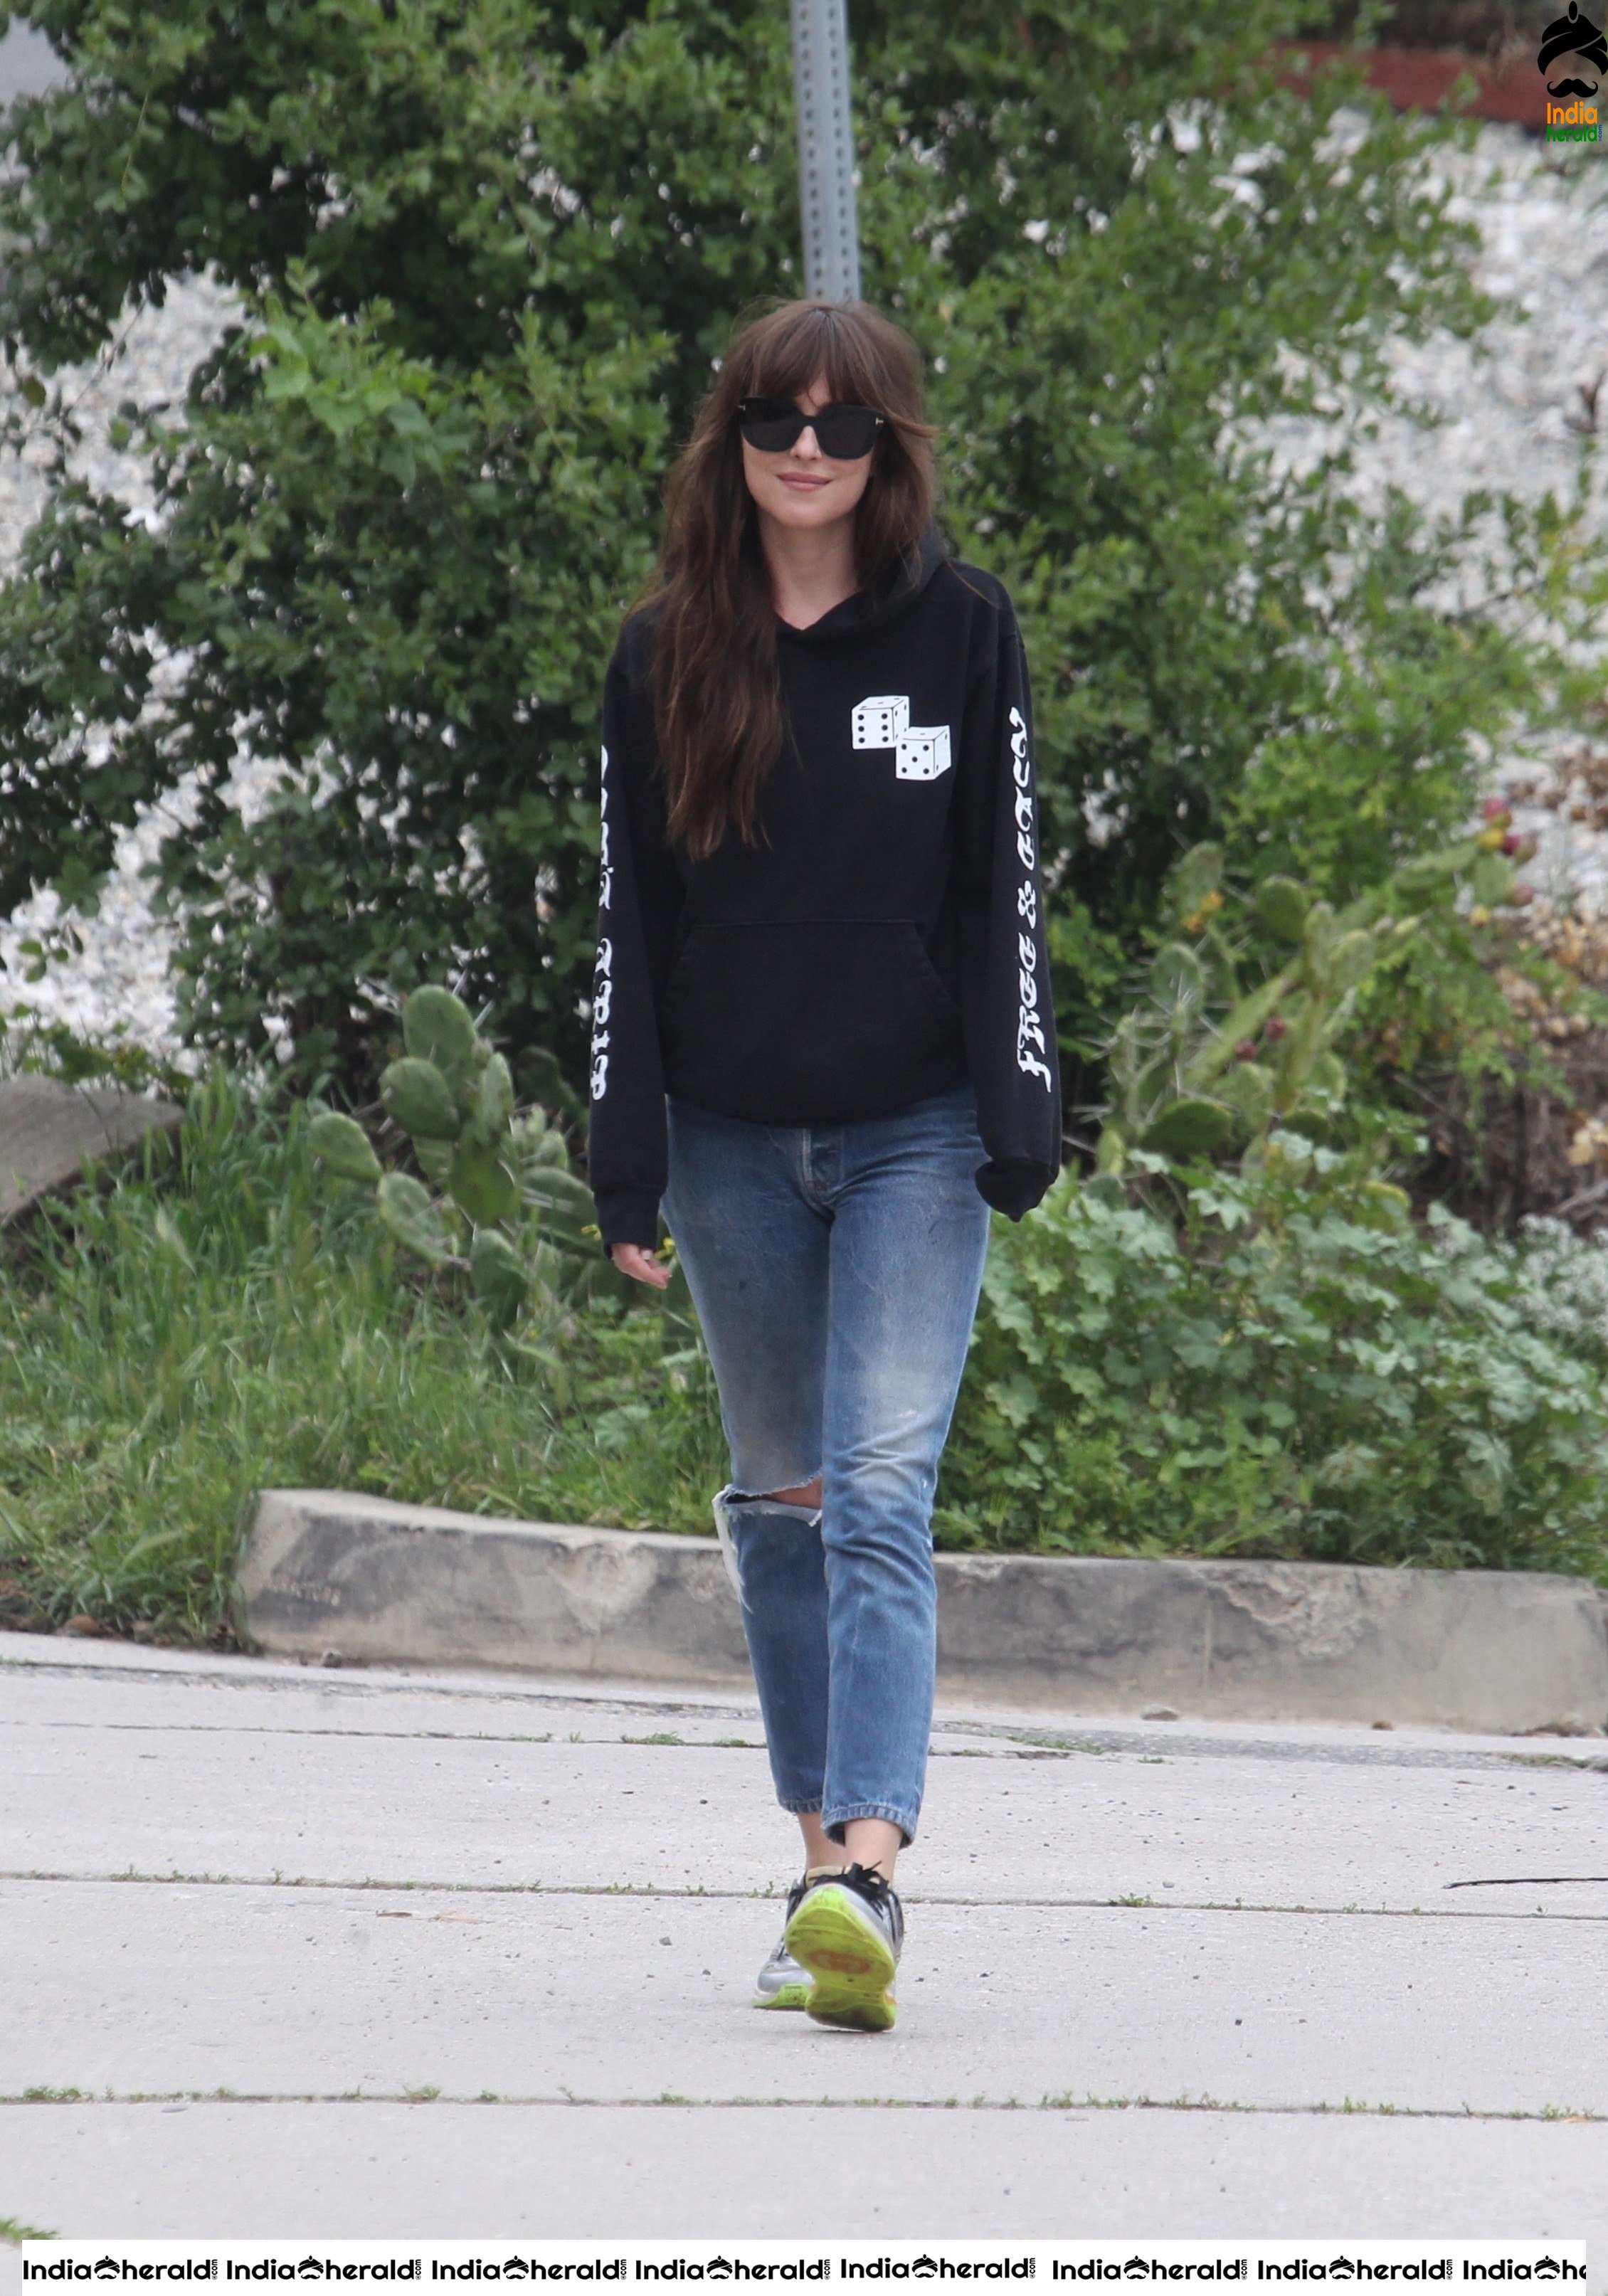 Dakota Johnson caught by Paparazzi as she takes a walk during lockdown in Los Angeles